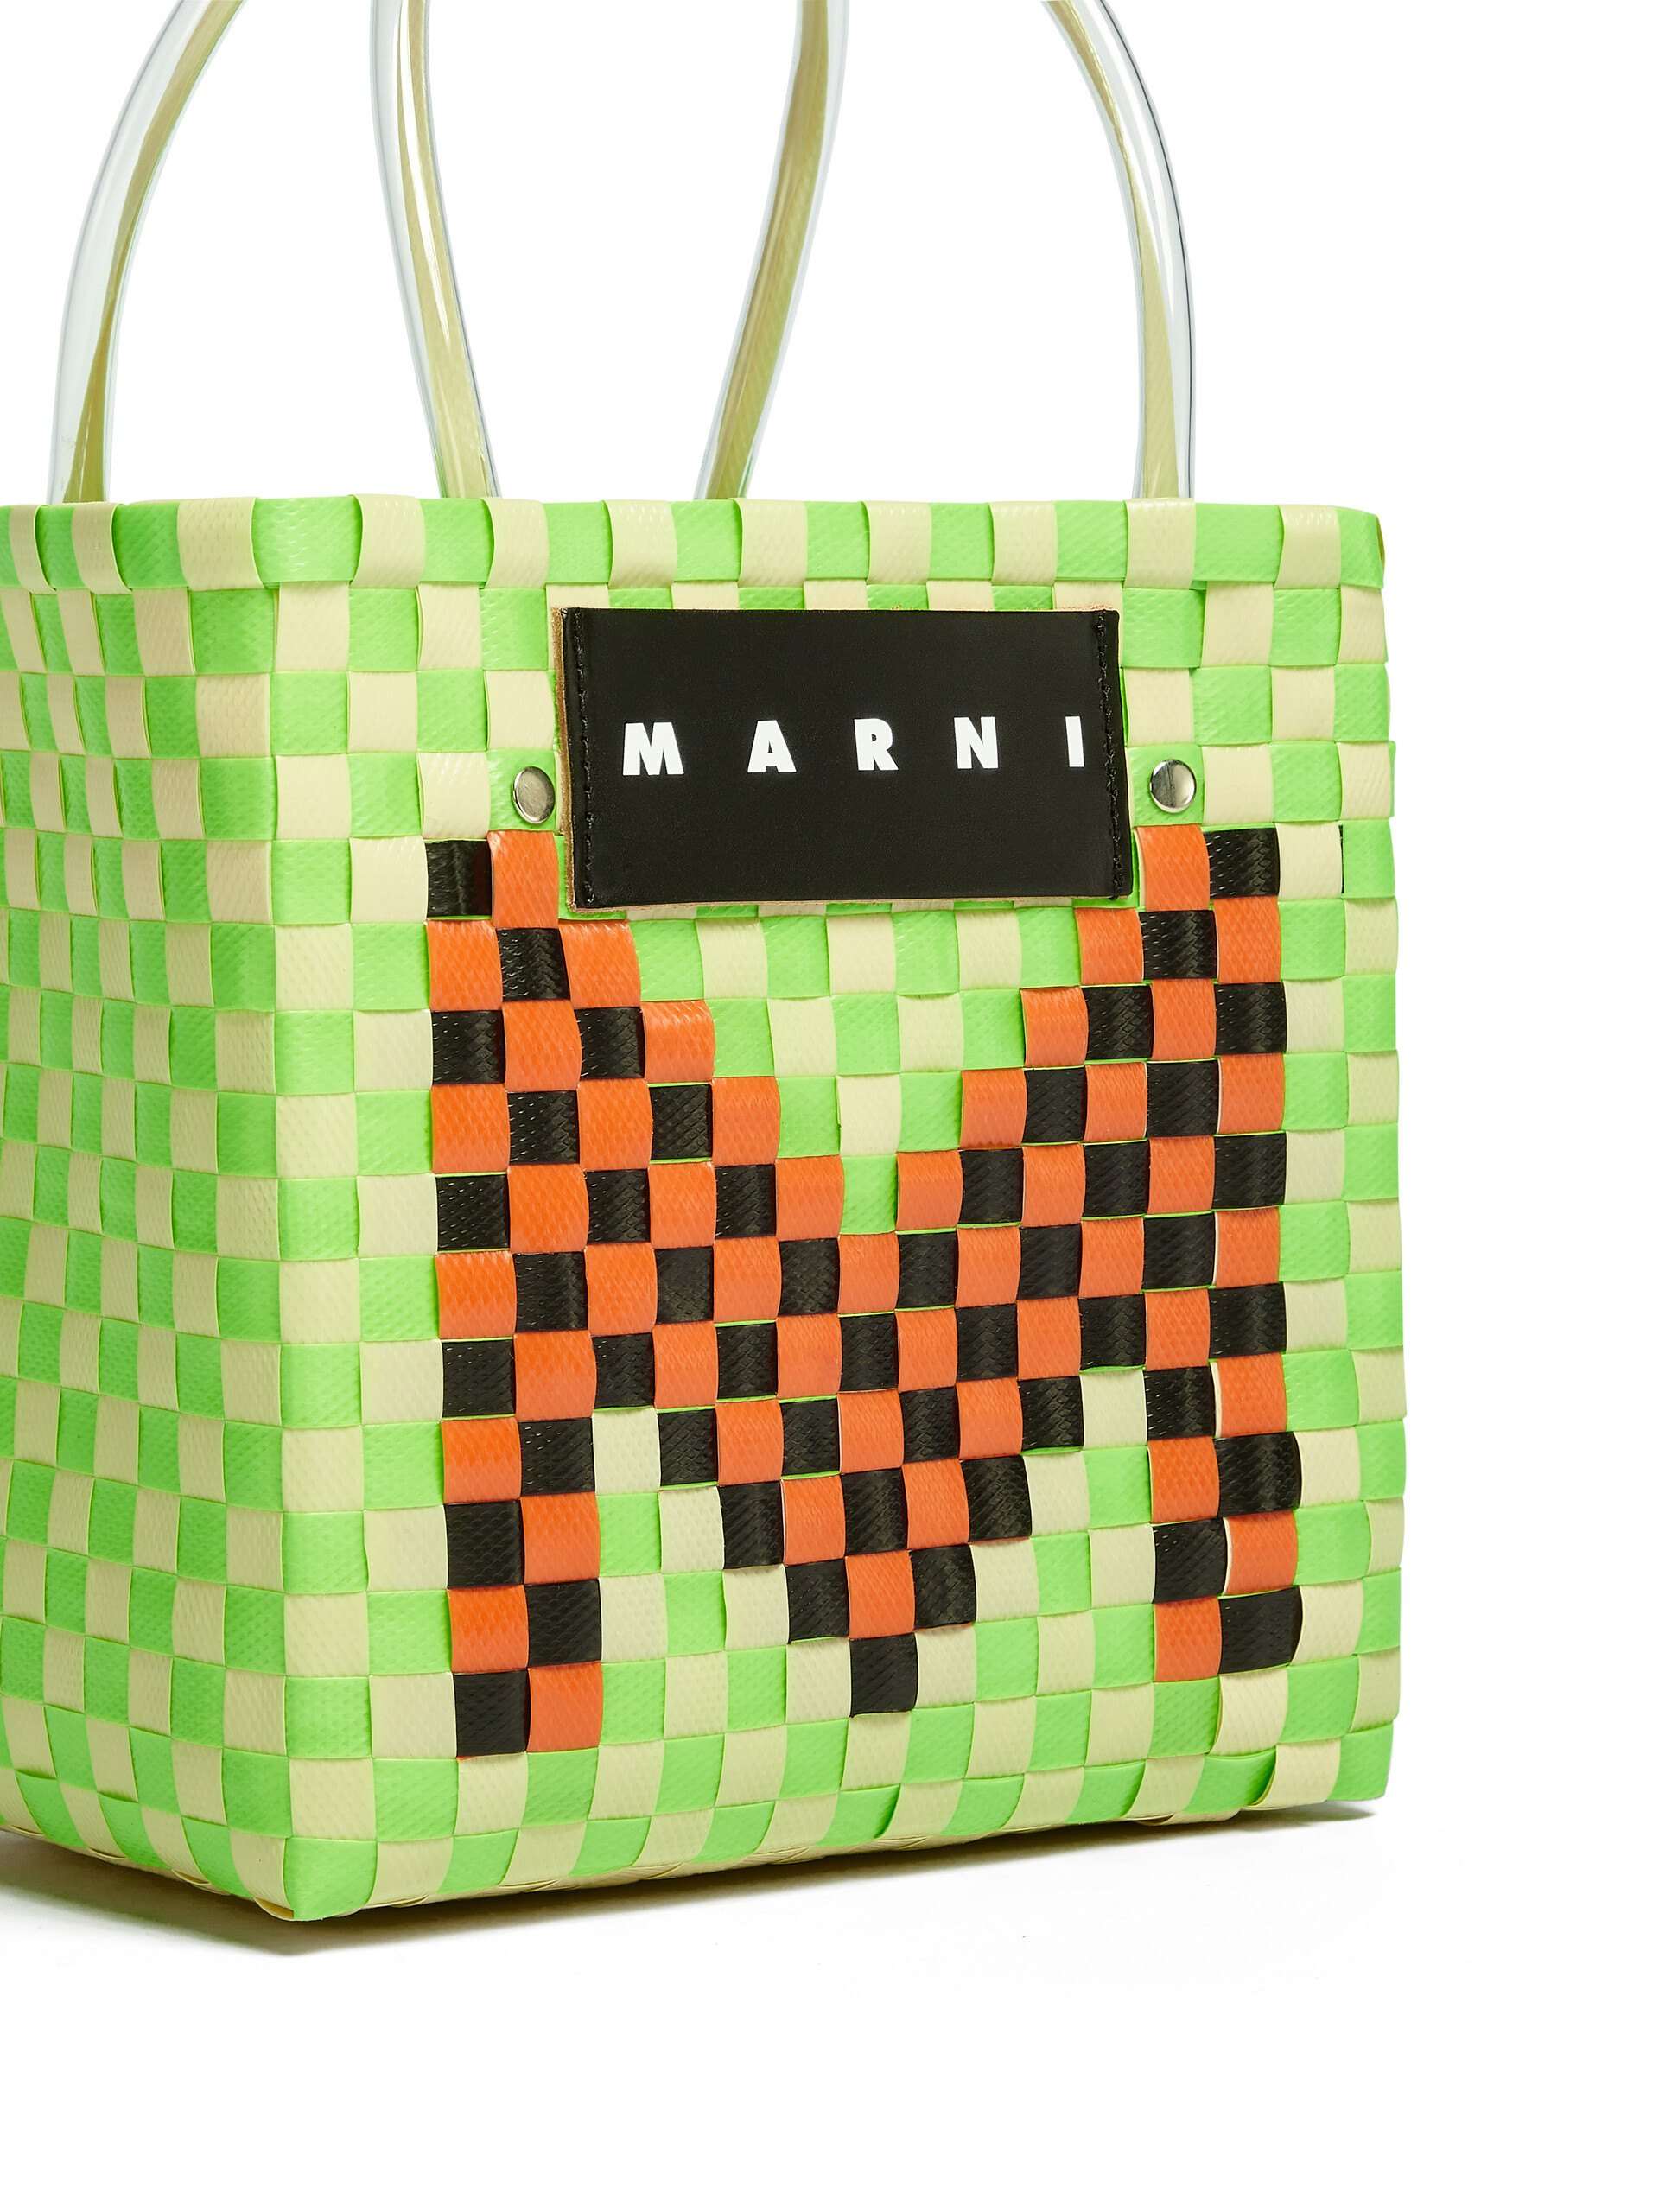 MARNI MARKET shopping bag in green woven material with M logo - Bags - Image 4